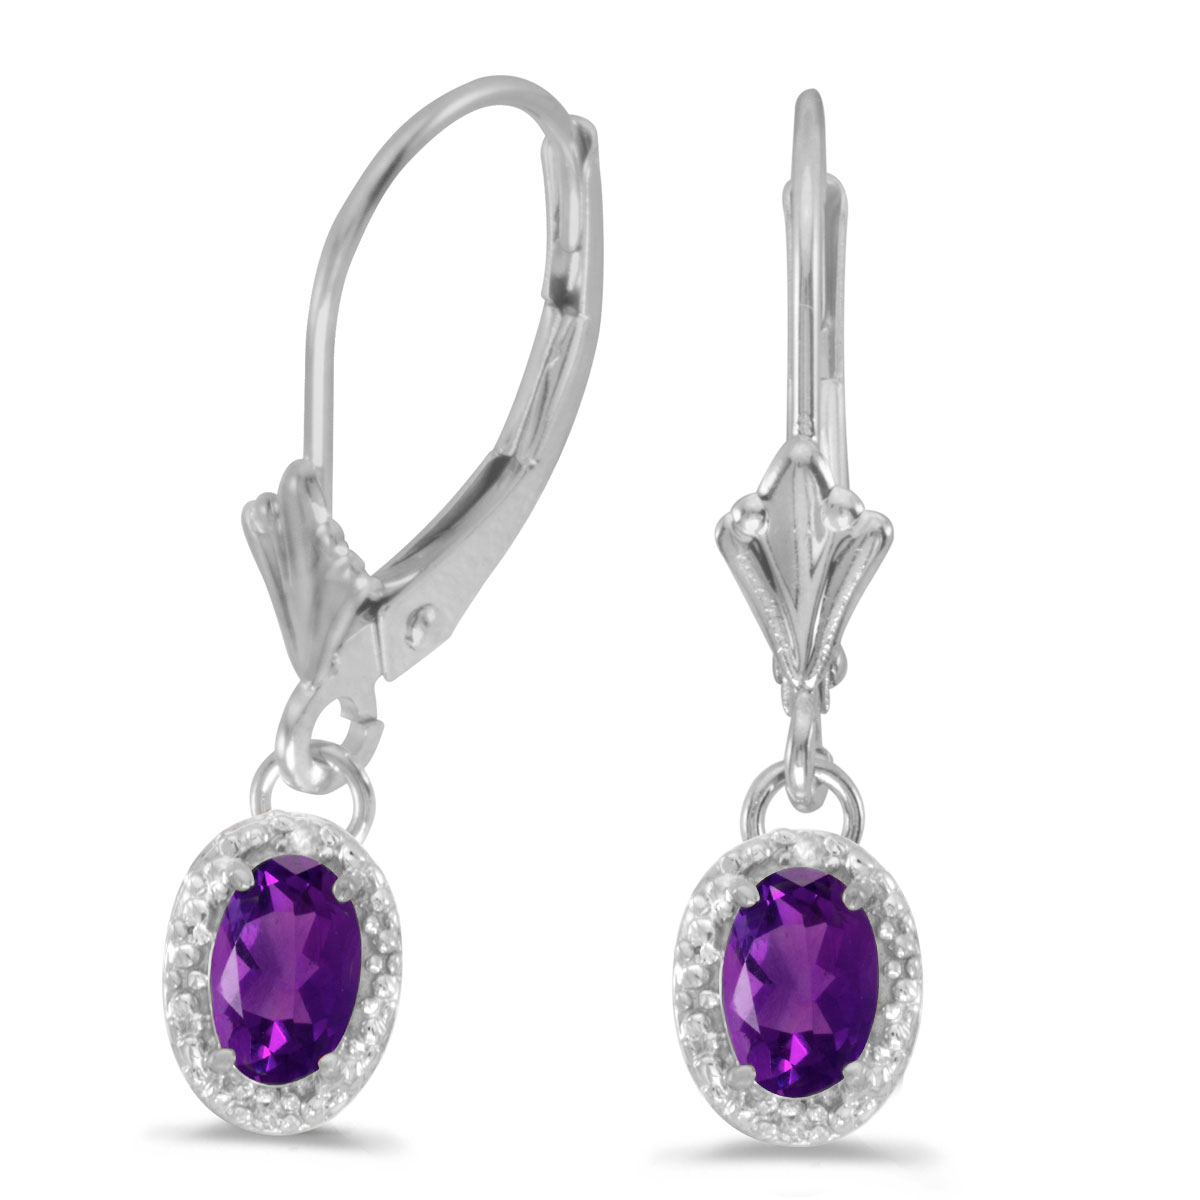 JCX2122: Beautiful 10k white gold leverback earrings with lovely 6x4 mm amethysts complemented with bright diamonds.